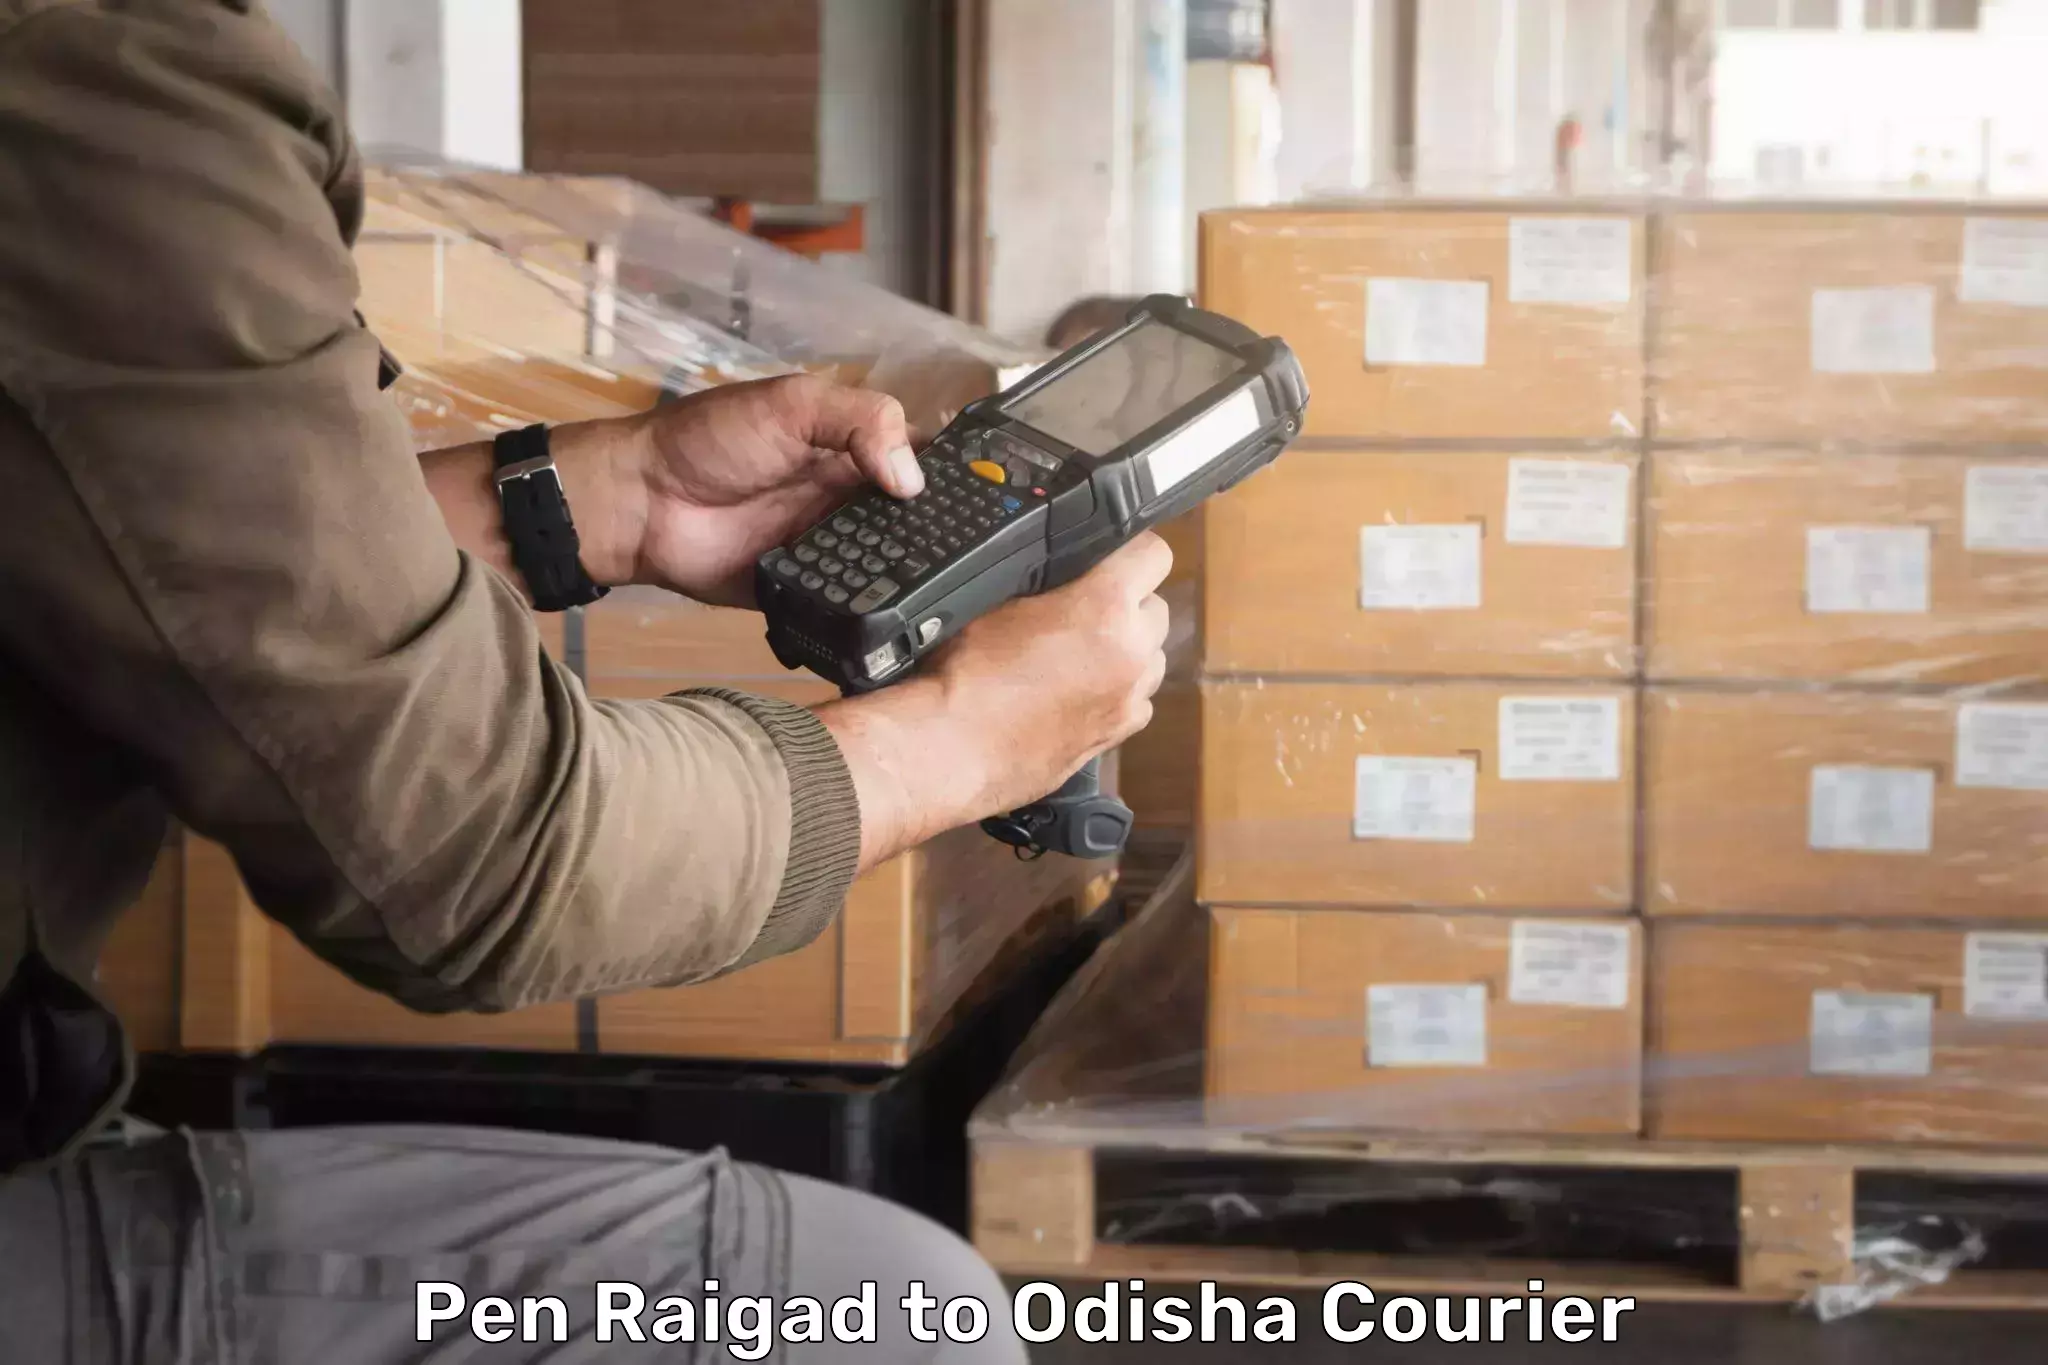 Online package tracking in Pen Raigad to Bhawanipatna